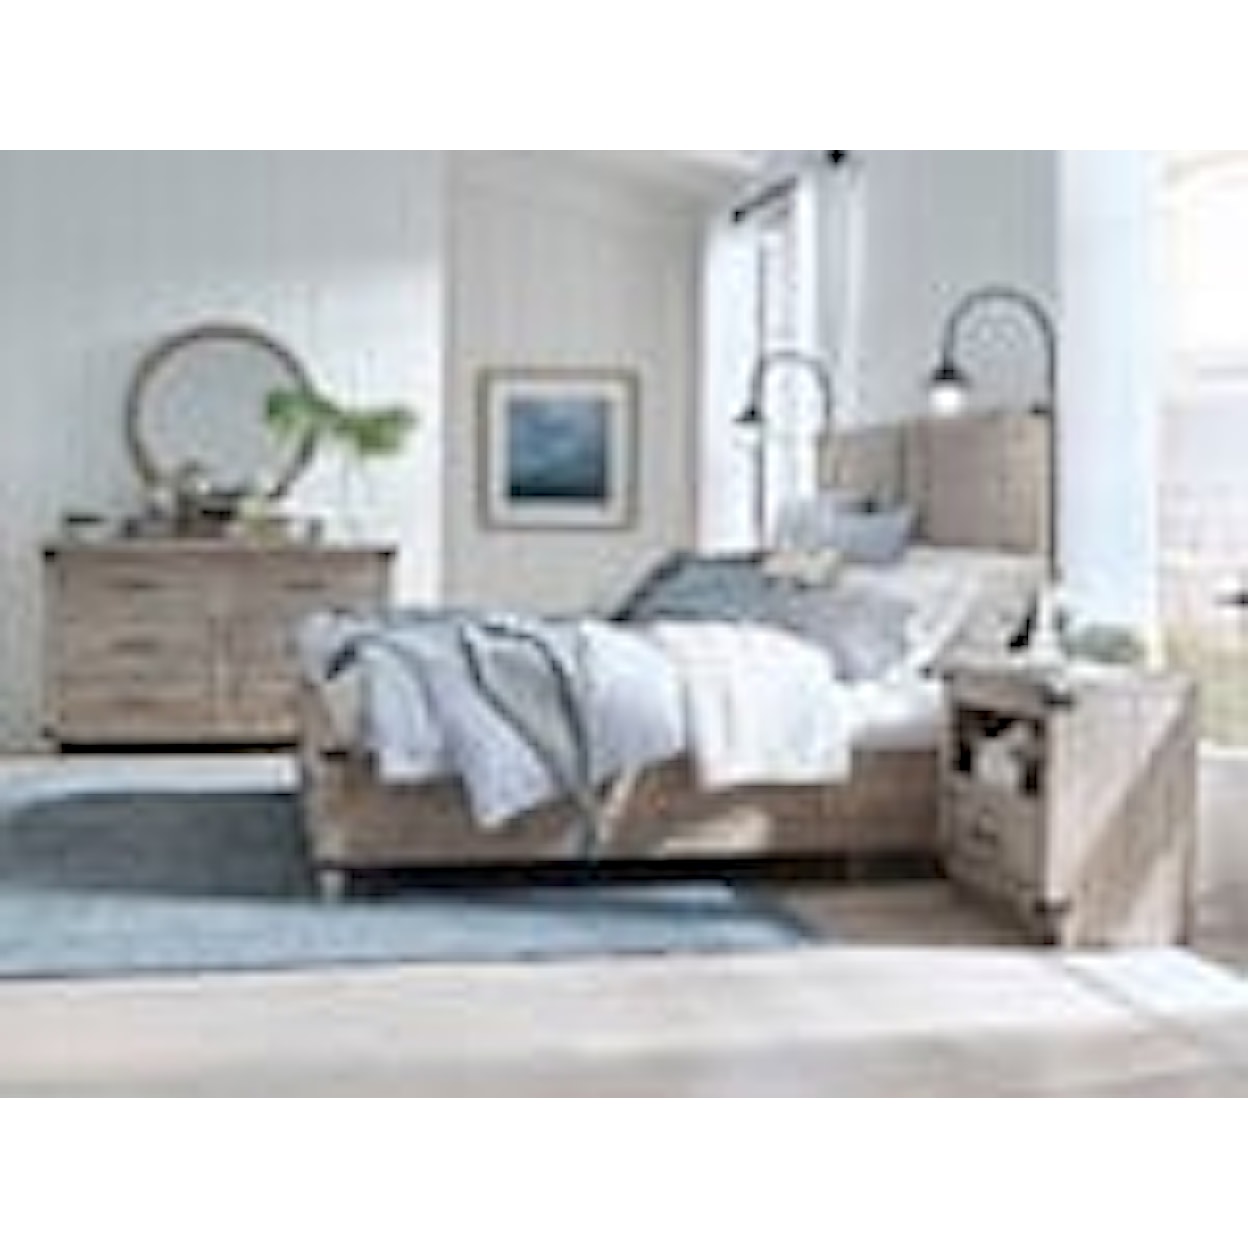 Aspenhome Foundry California King Storage Panel Bed